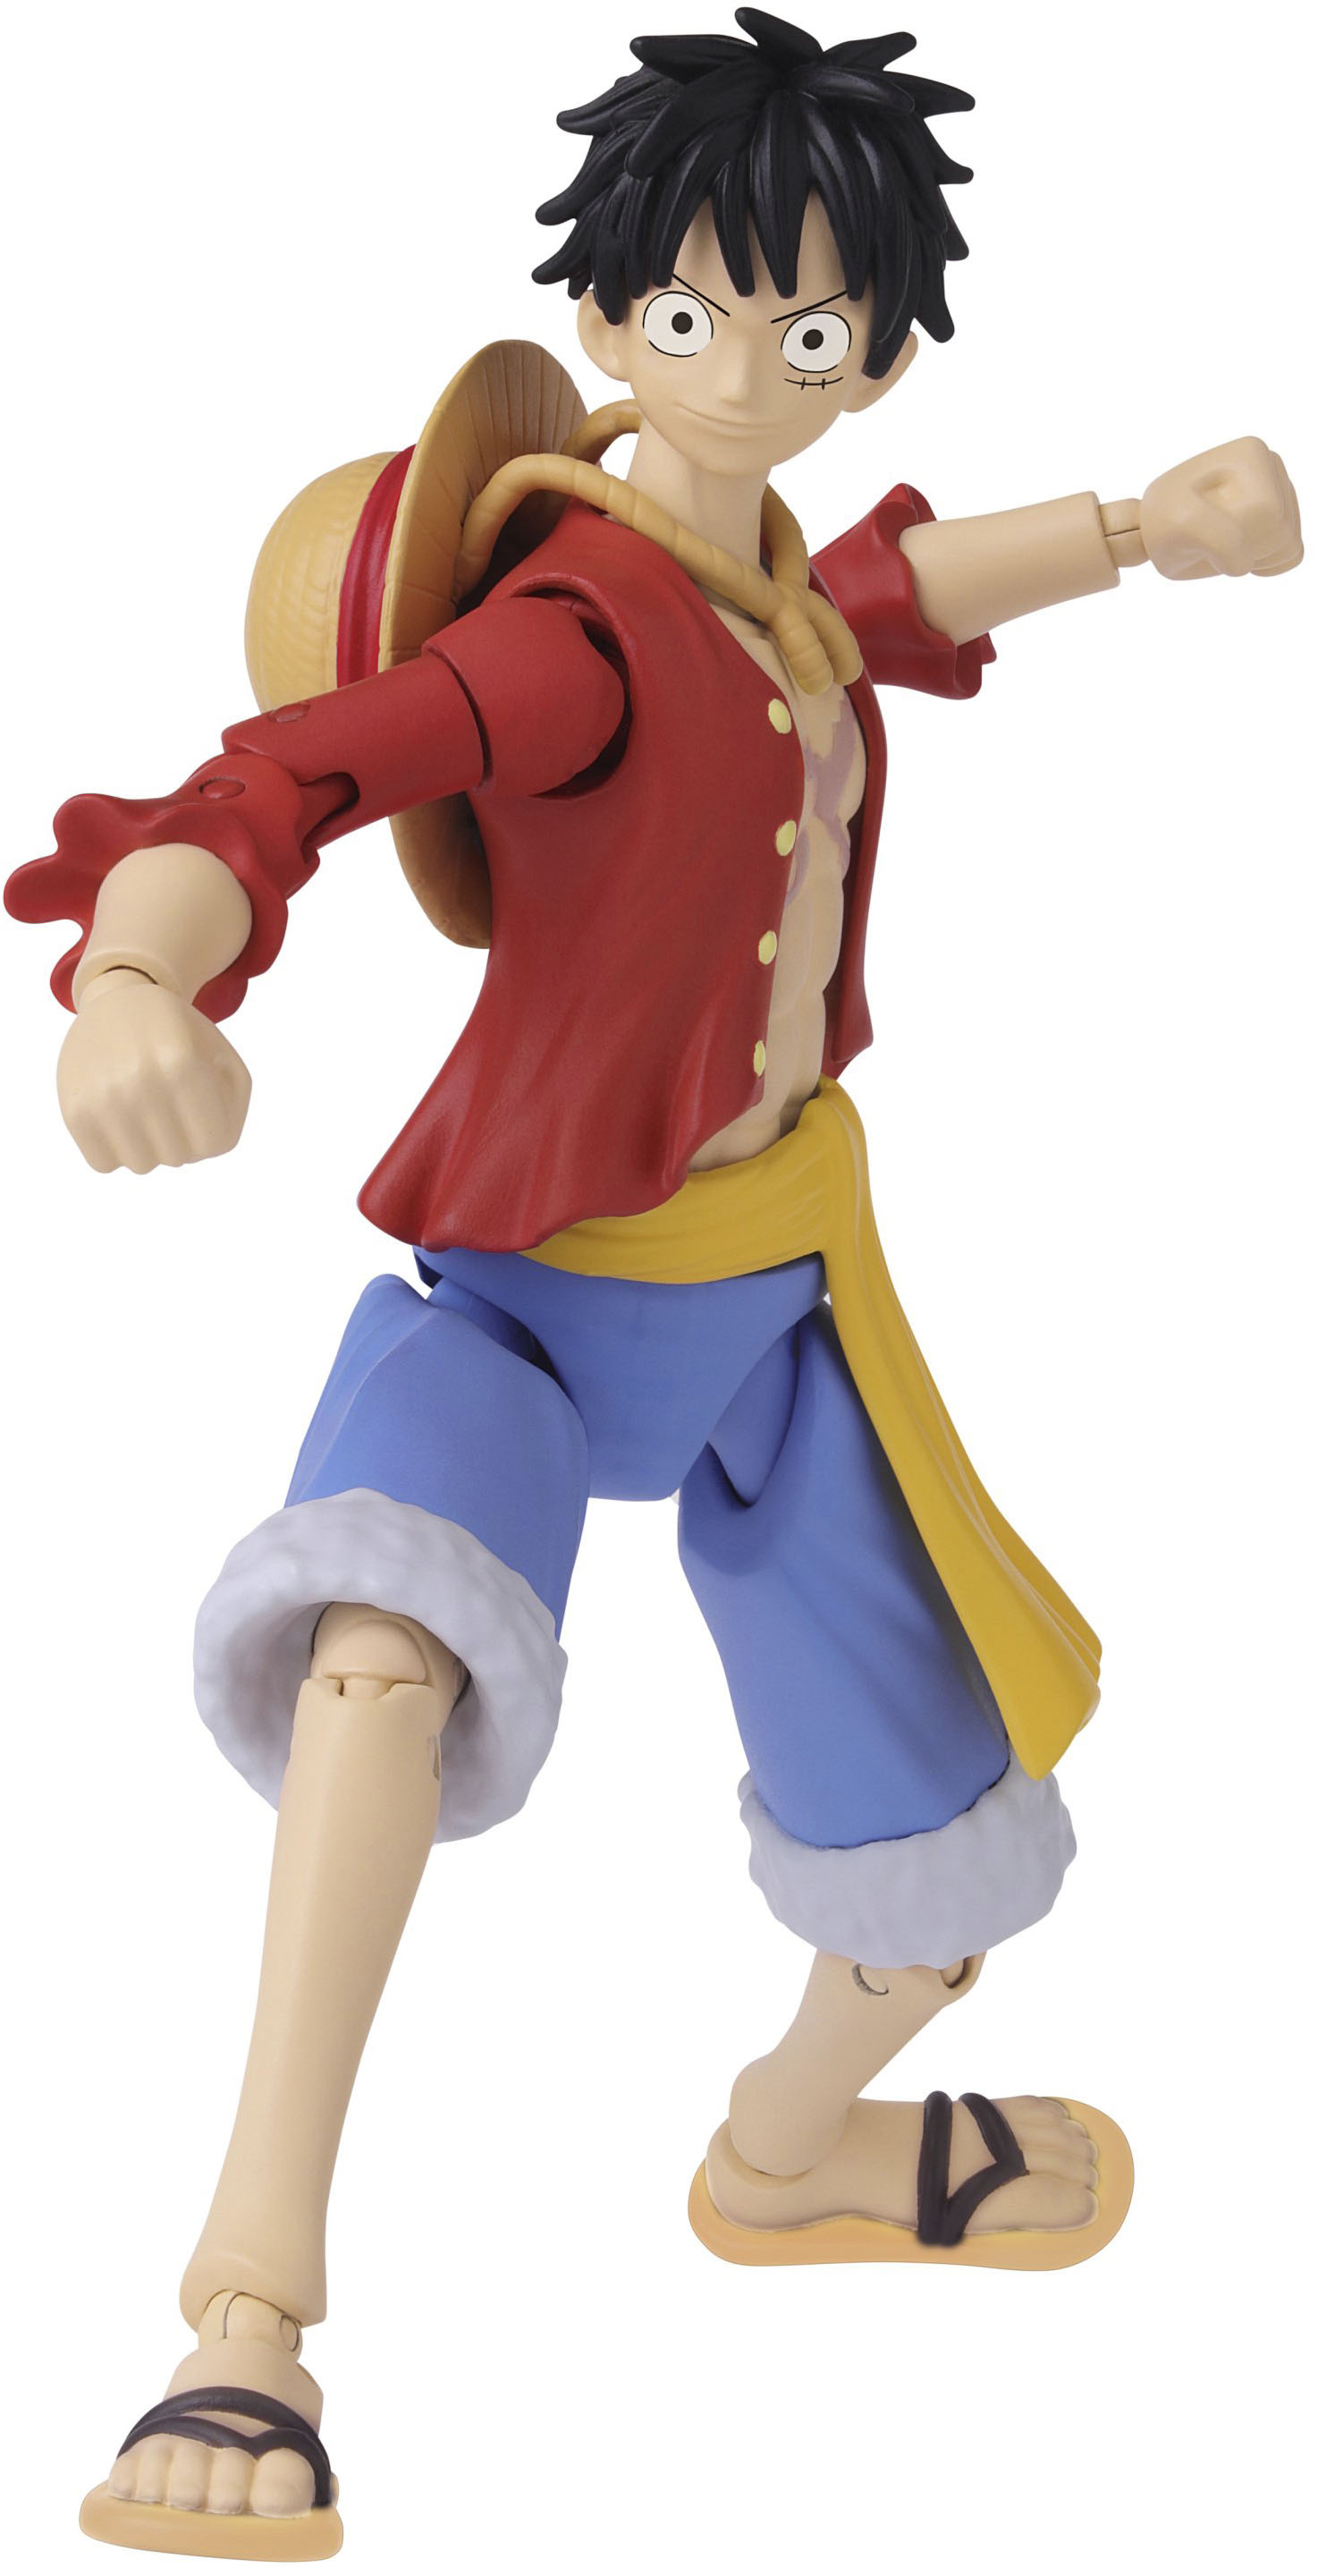 Bandai One Piece Collection Figure Change the World 